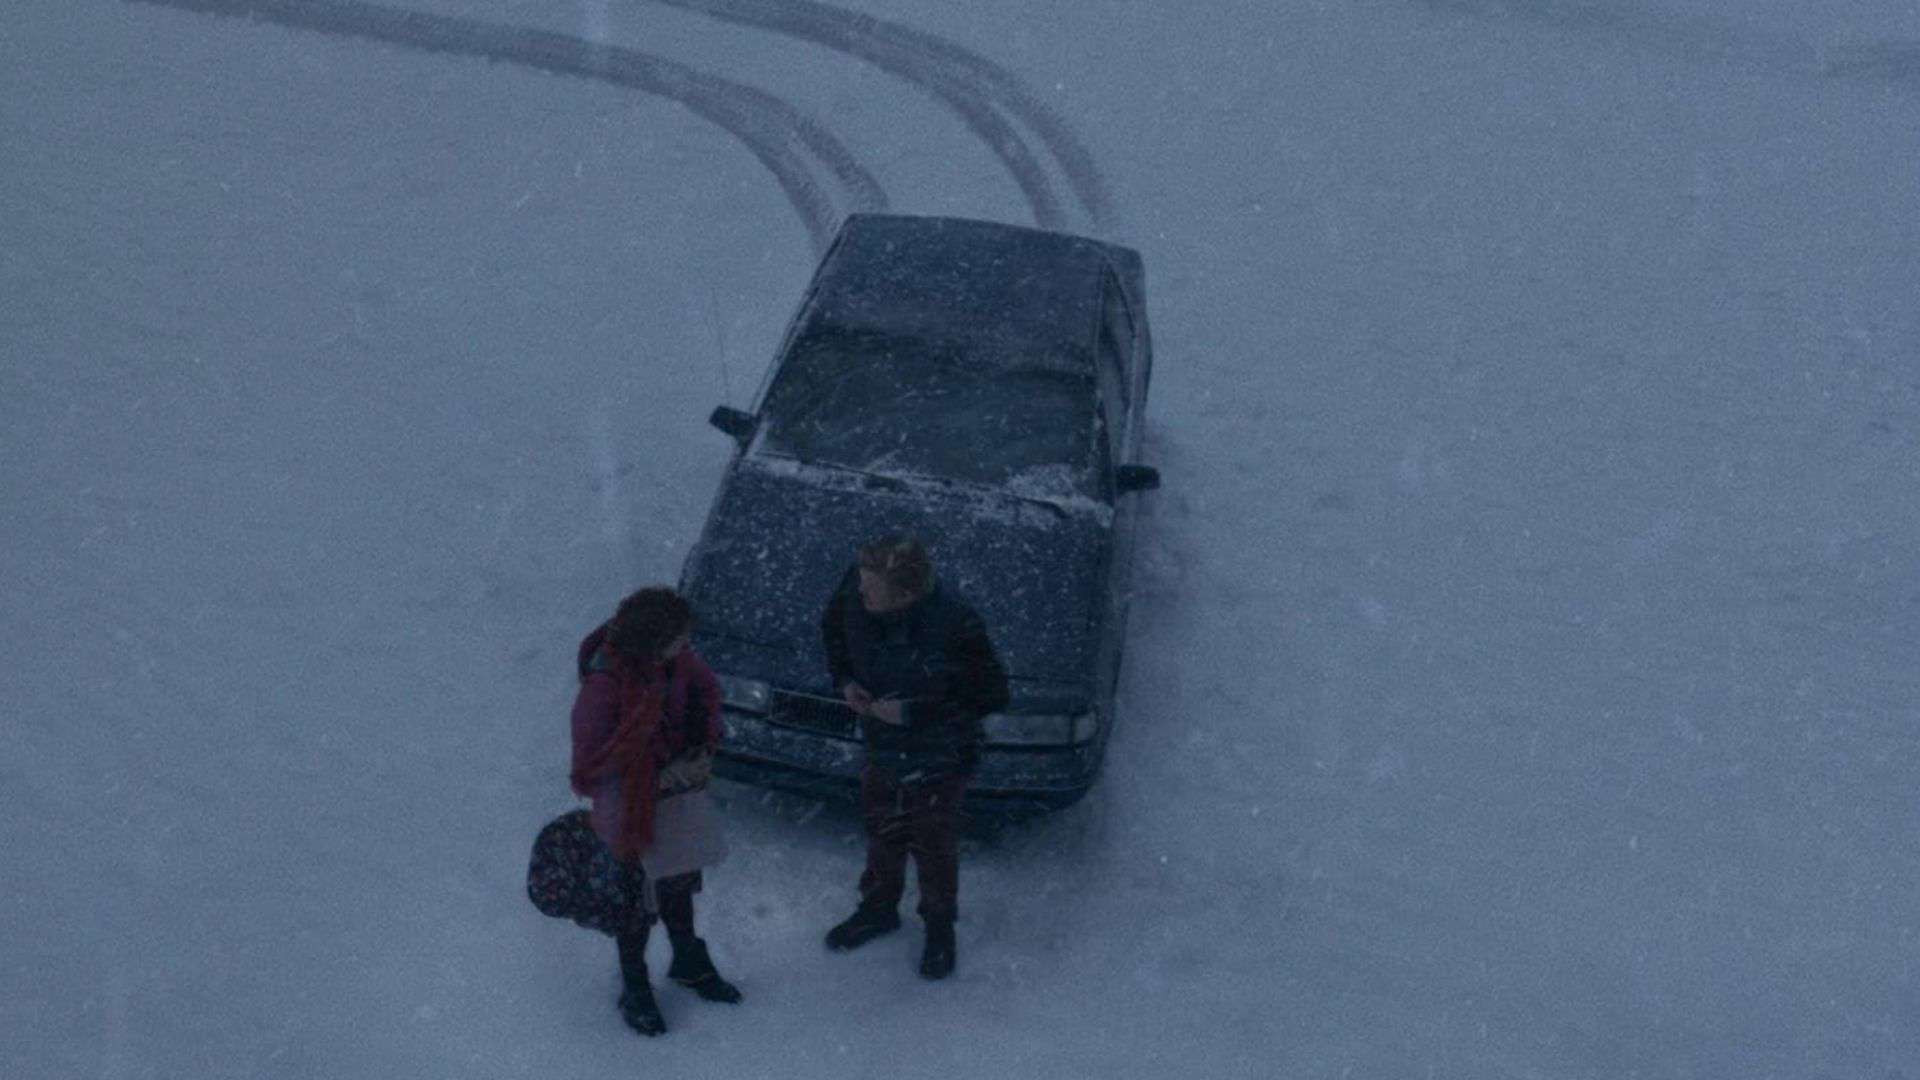 Two people stand in the snow next to a car in this image from Likely Story.